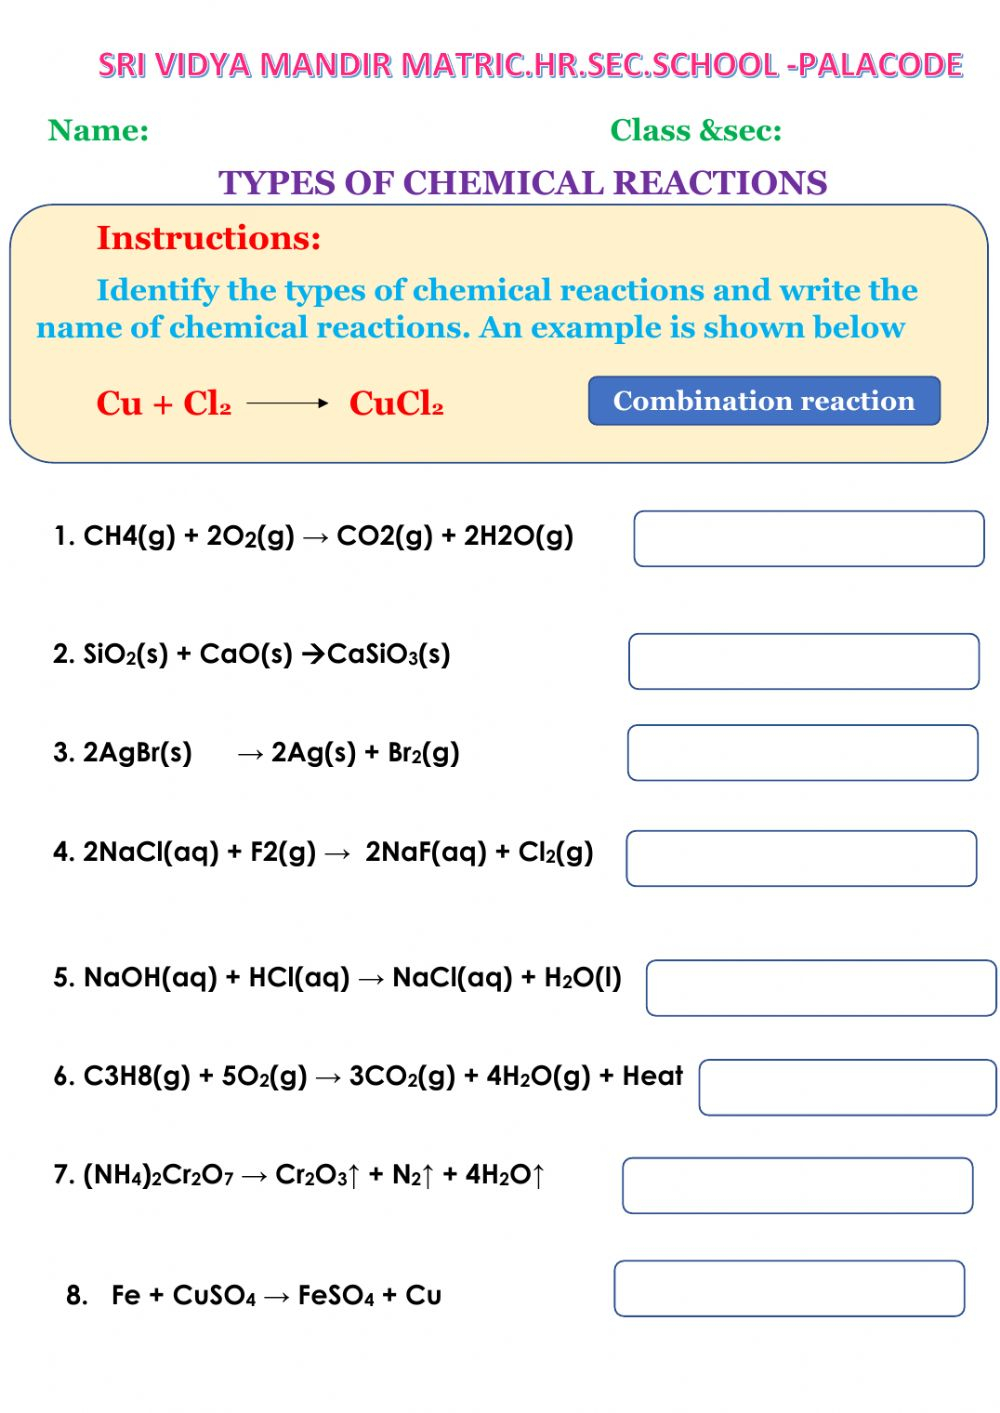 Identify Types Of Chemical Reactions Saferbrowser Yahoo Image Search Chemistryworksheet